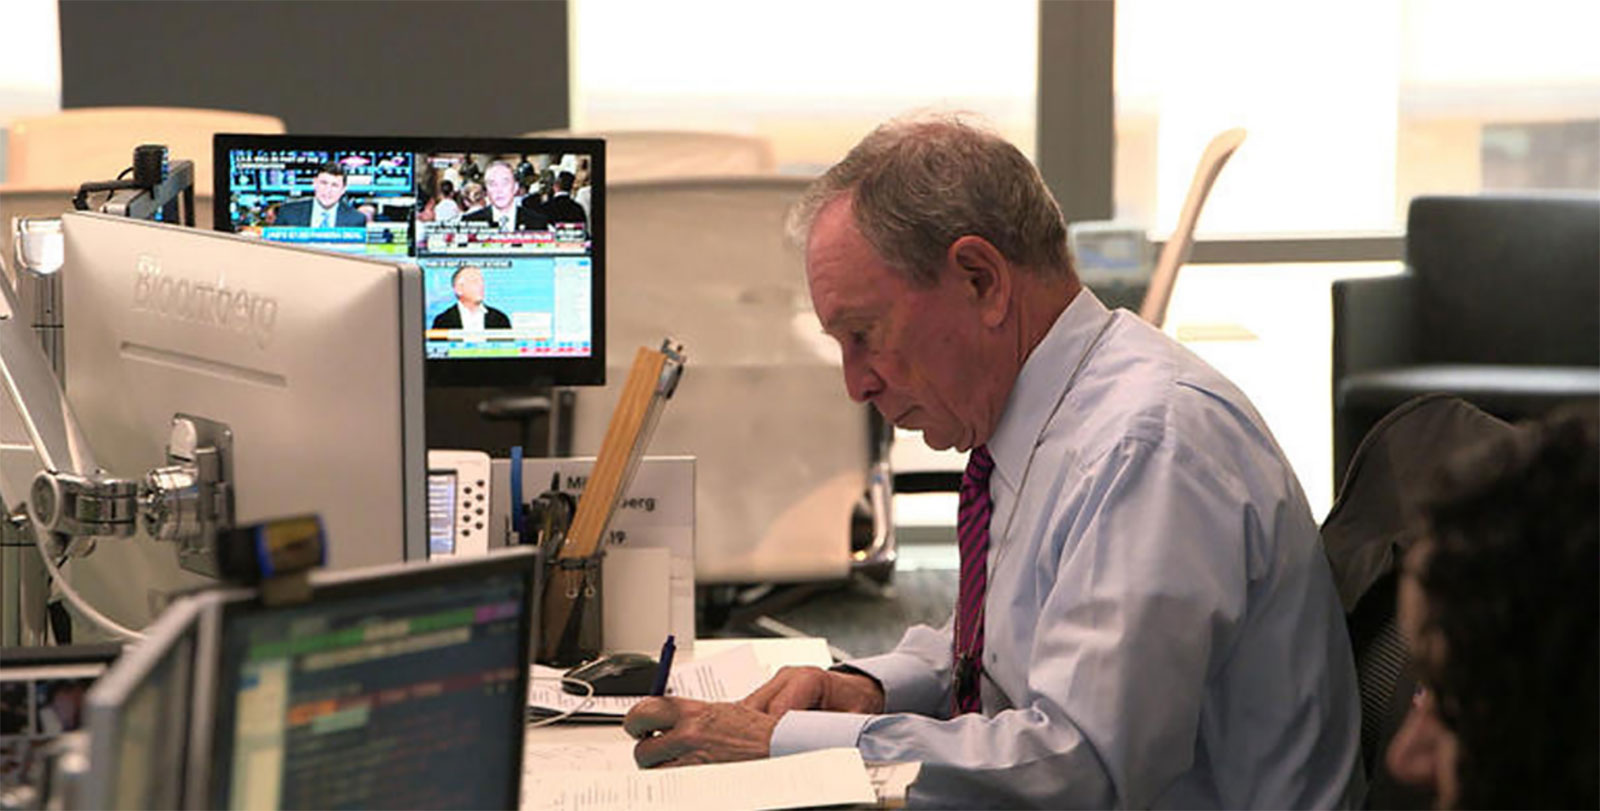 60 Minutes interview with Mike Bloomberg Bloomberg Professional Services